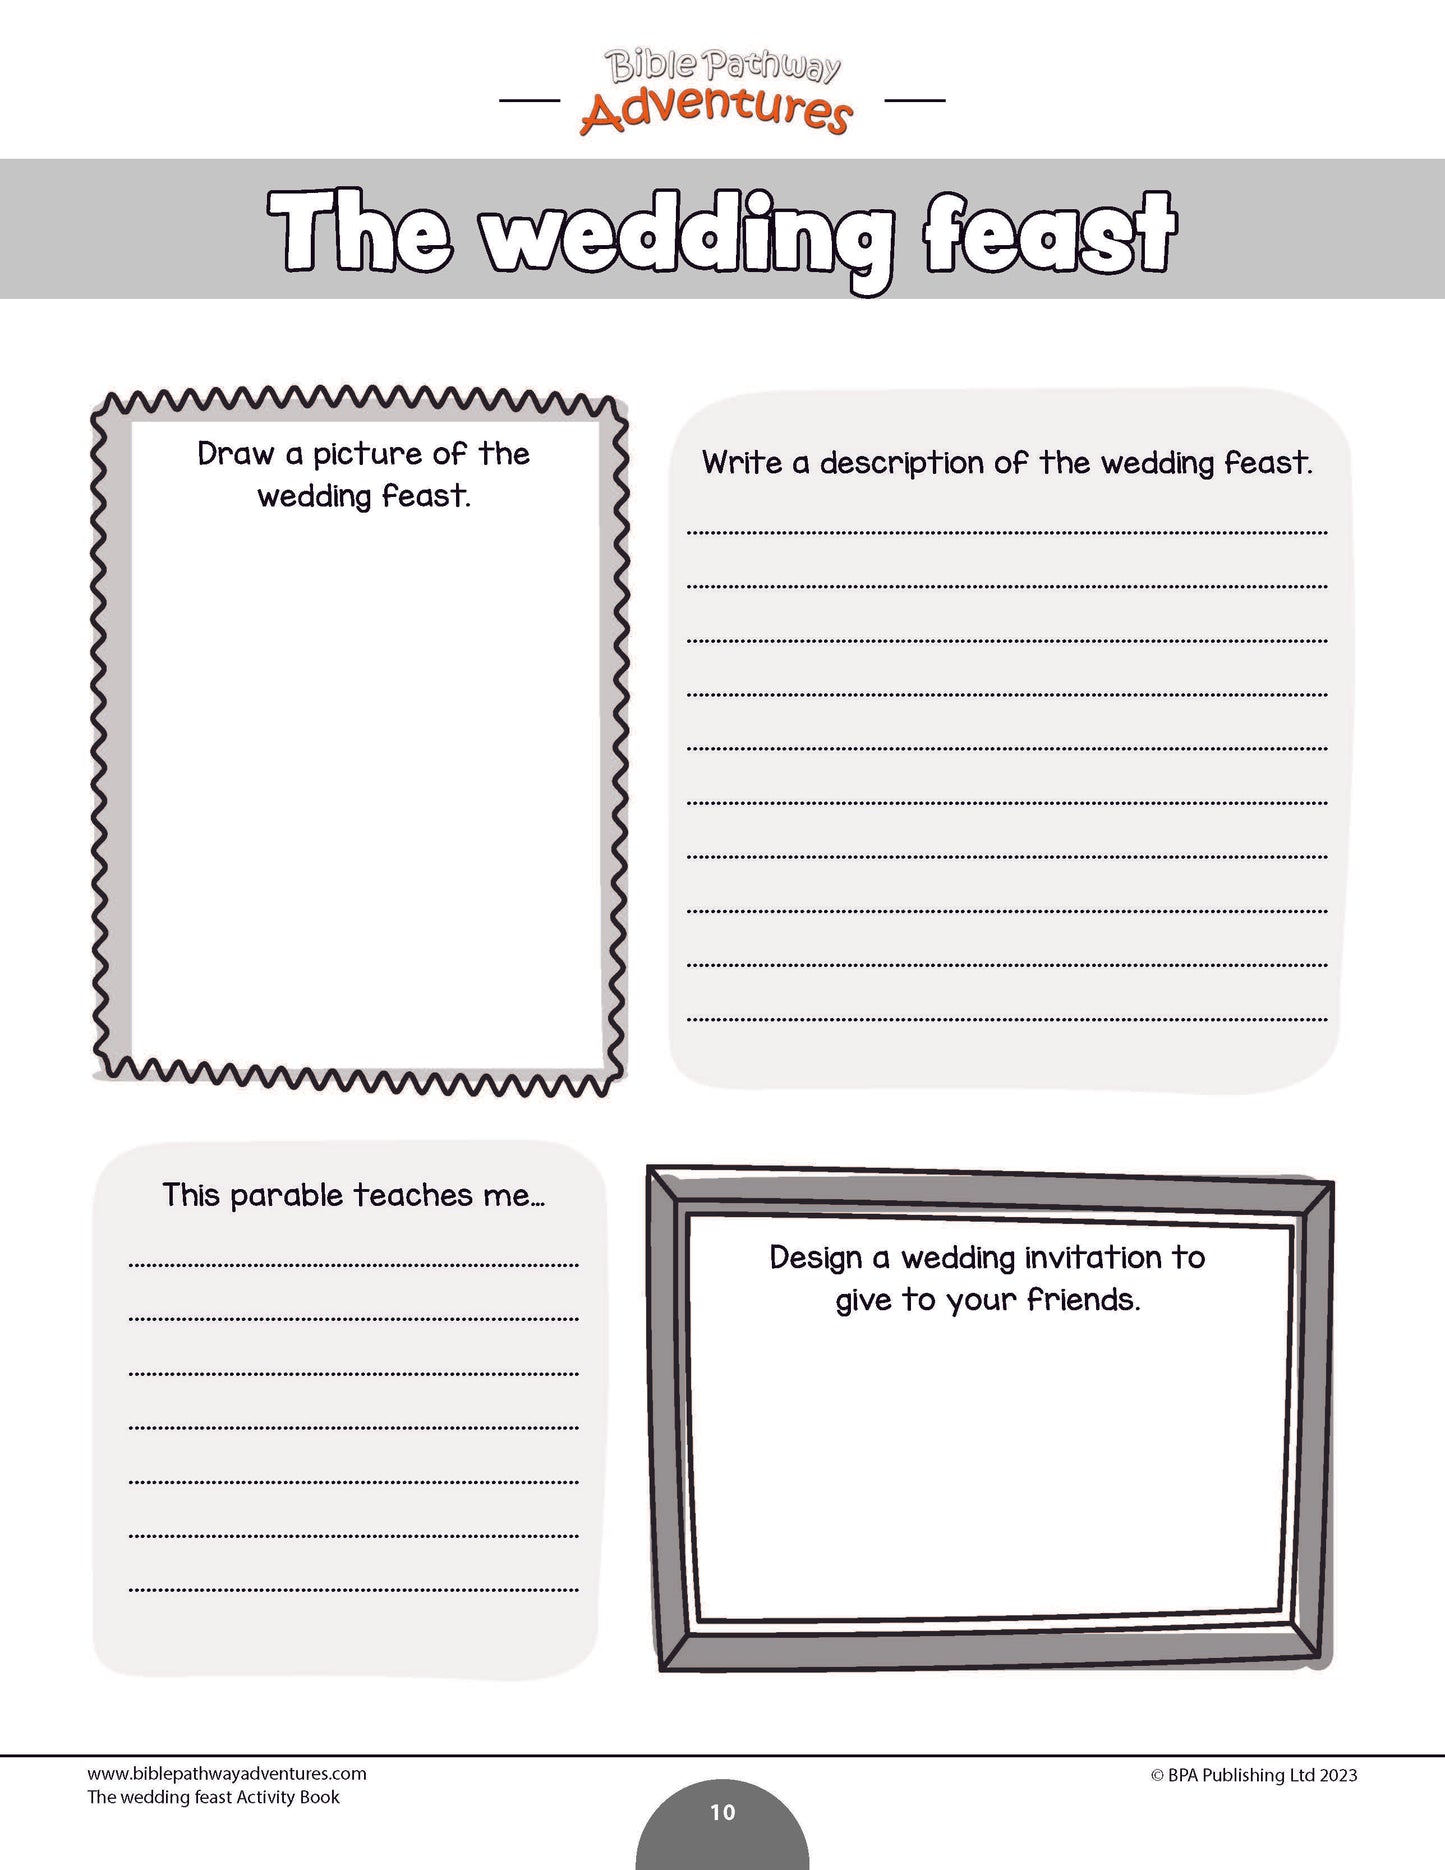 Parable of the Wedding Feast Activity Book (PDF)